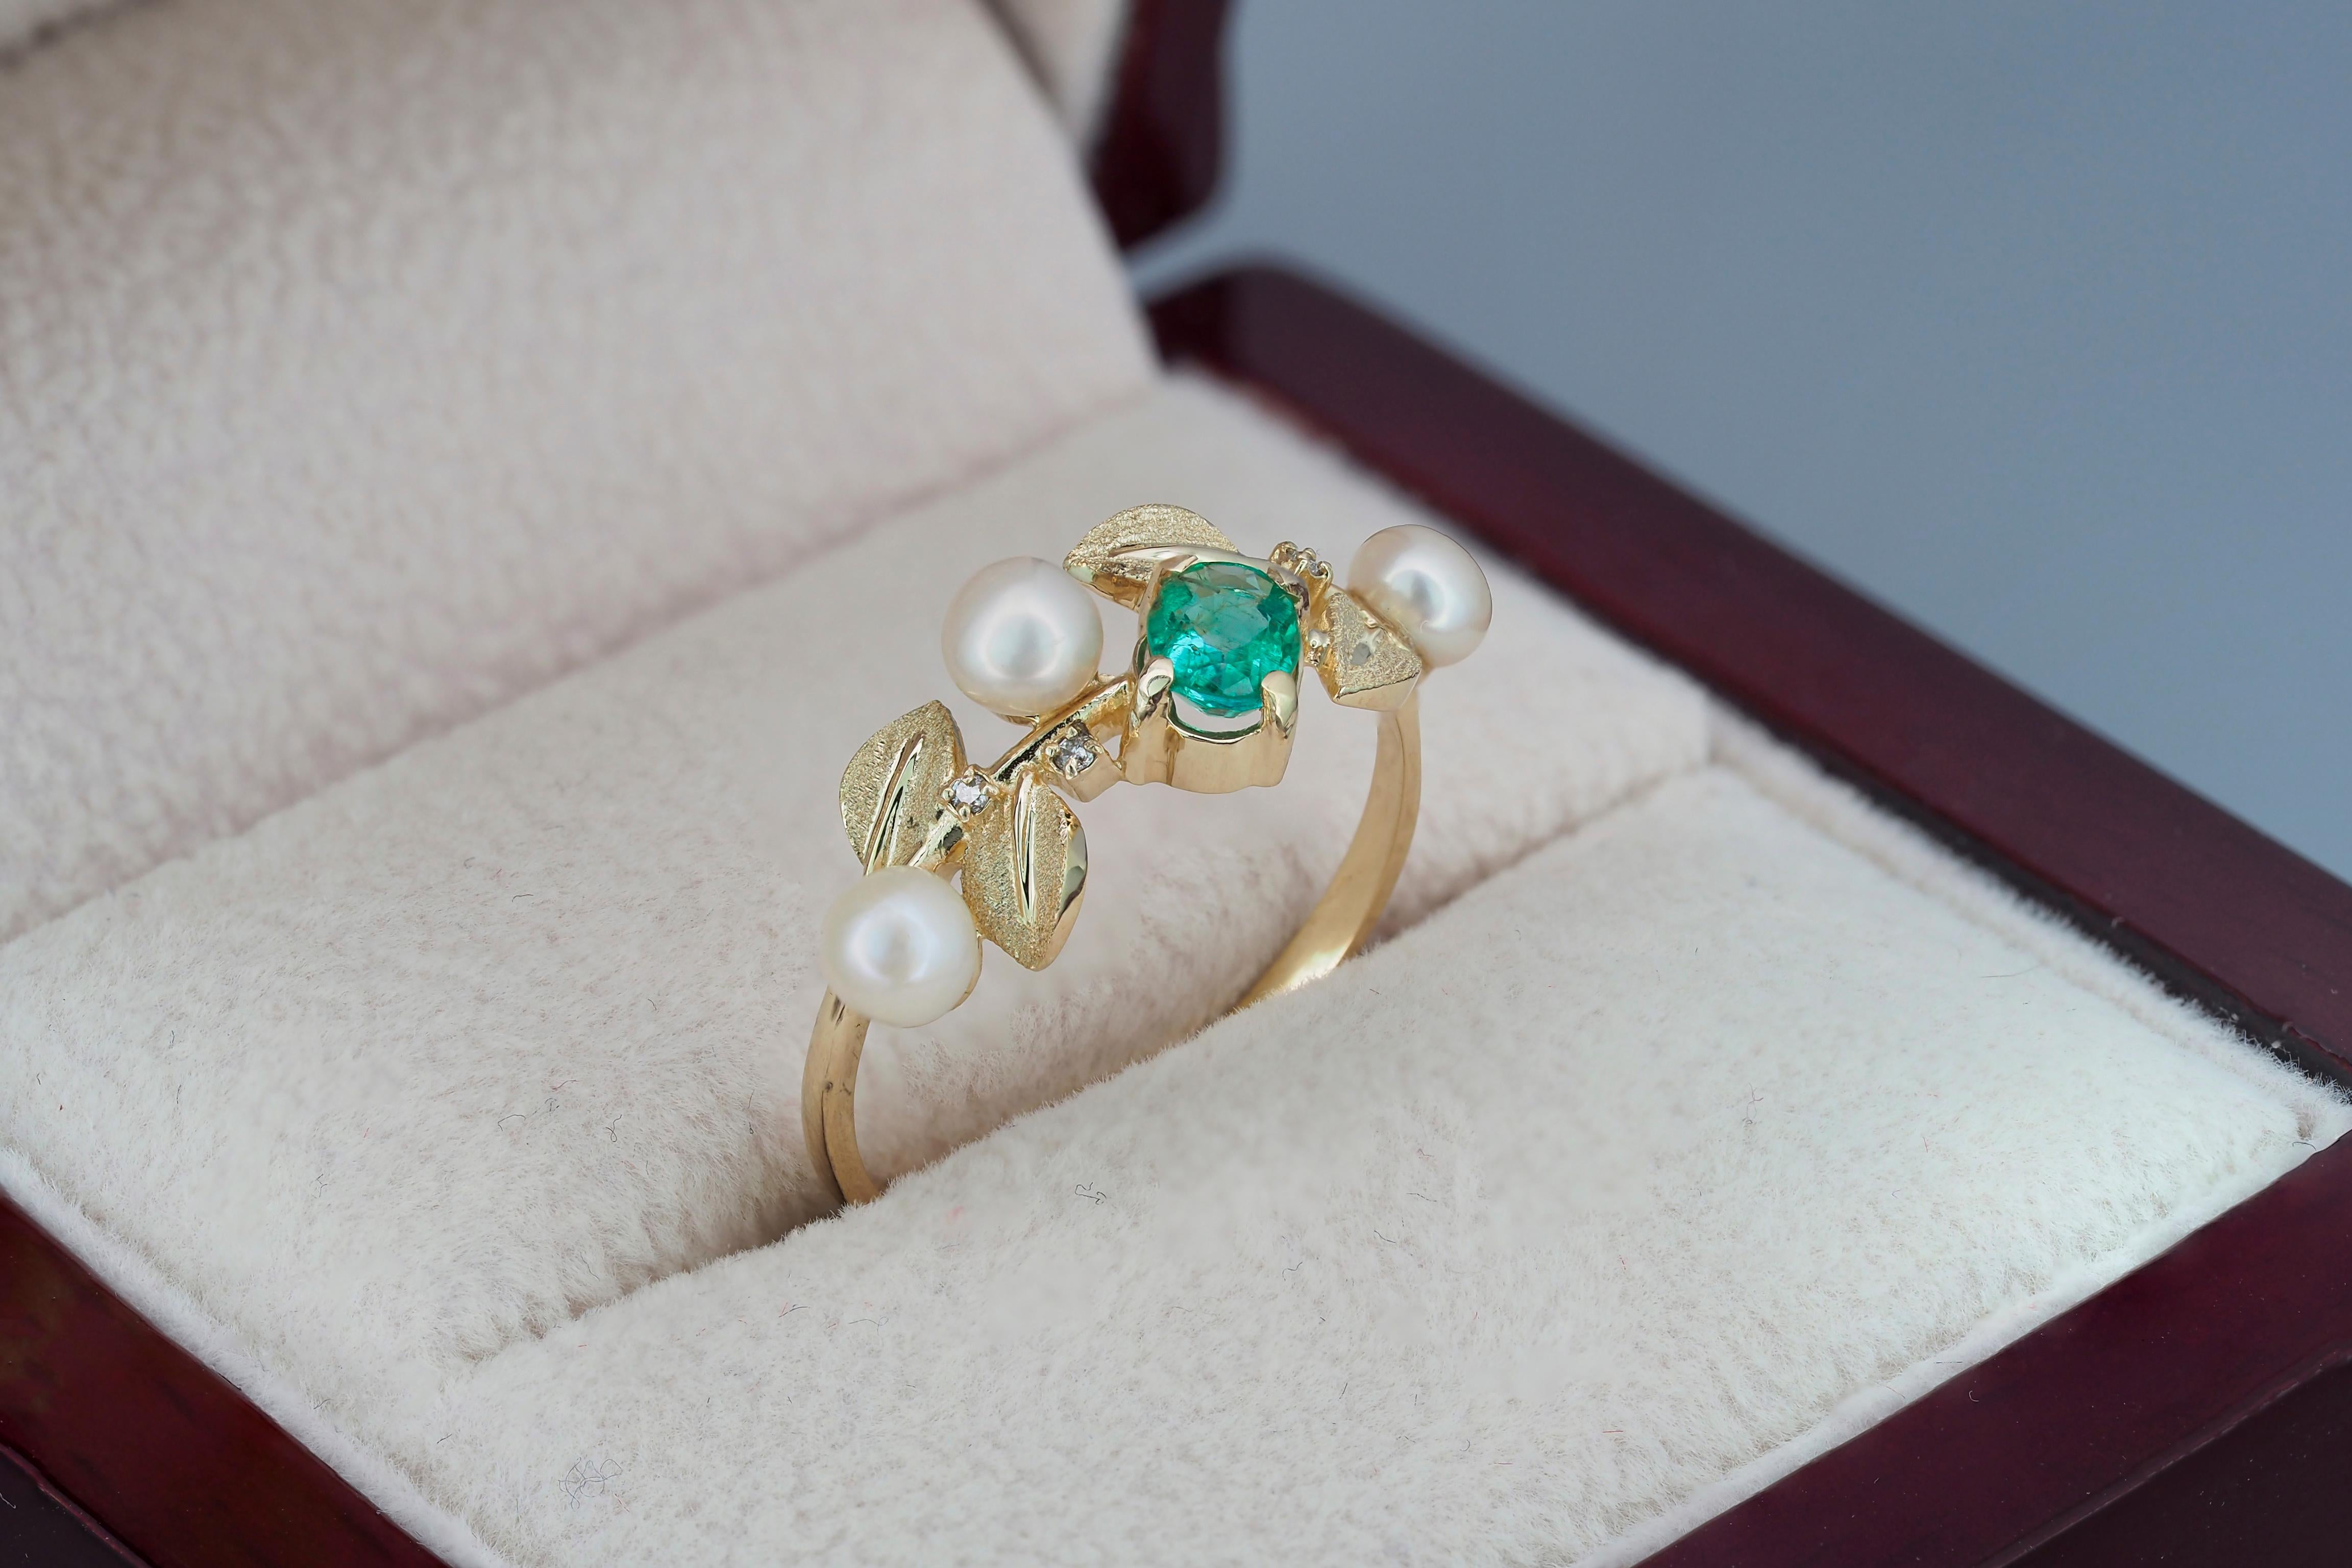 Women's 14k Gold Ring with Emerald, Pearls and Diamonds